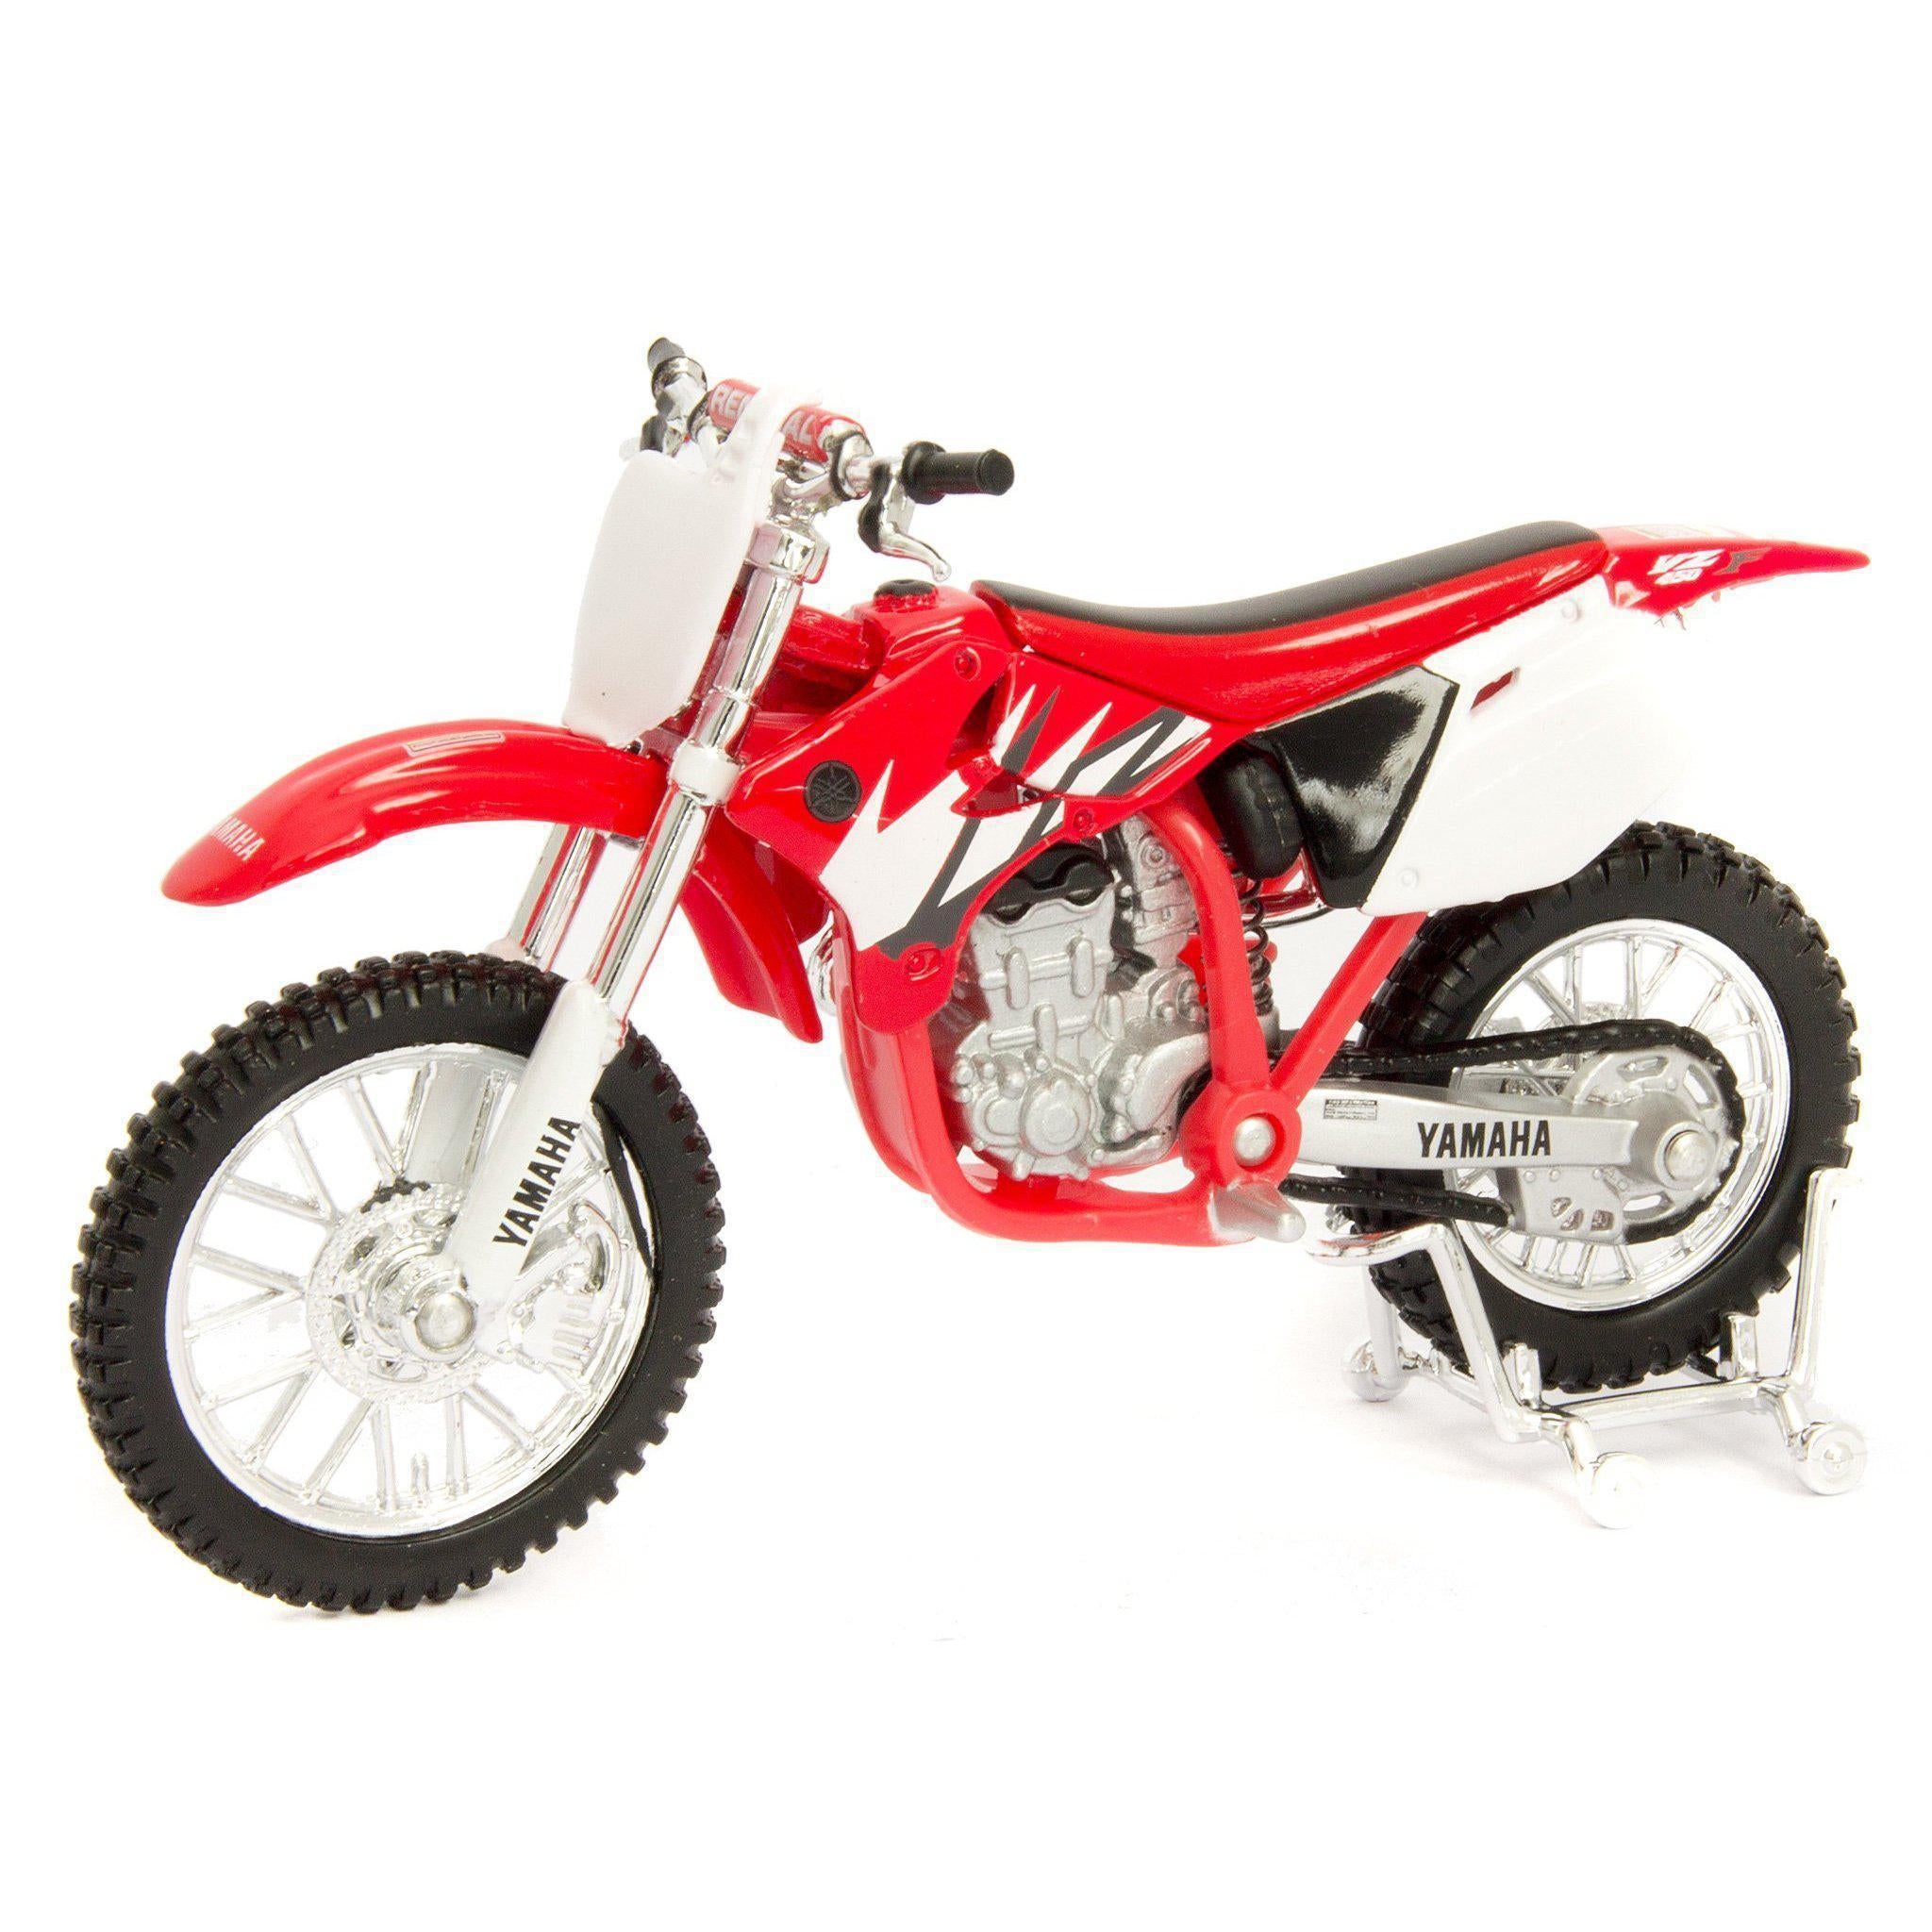 Yamaha YZ-450F Diecast Model Motorcycle red - 1:18 Scale-Maisto-Diecast Model Centre